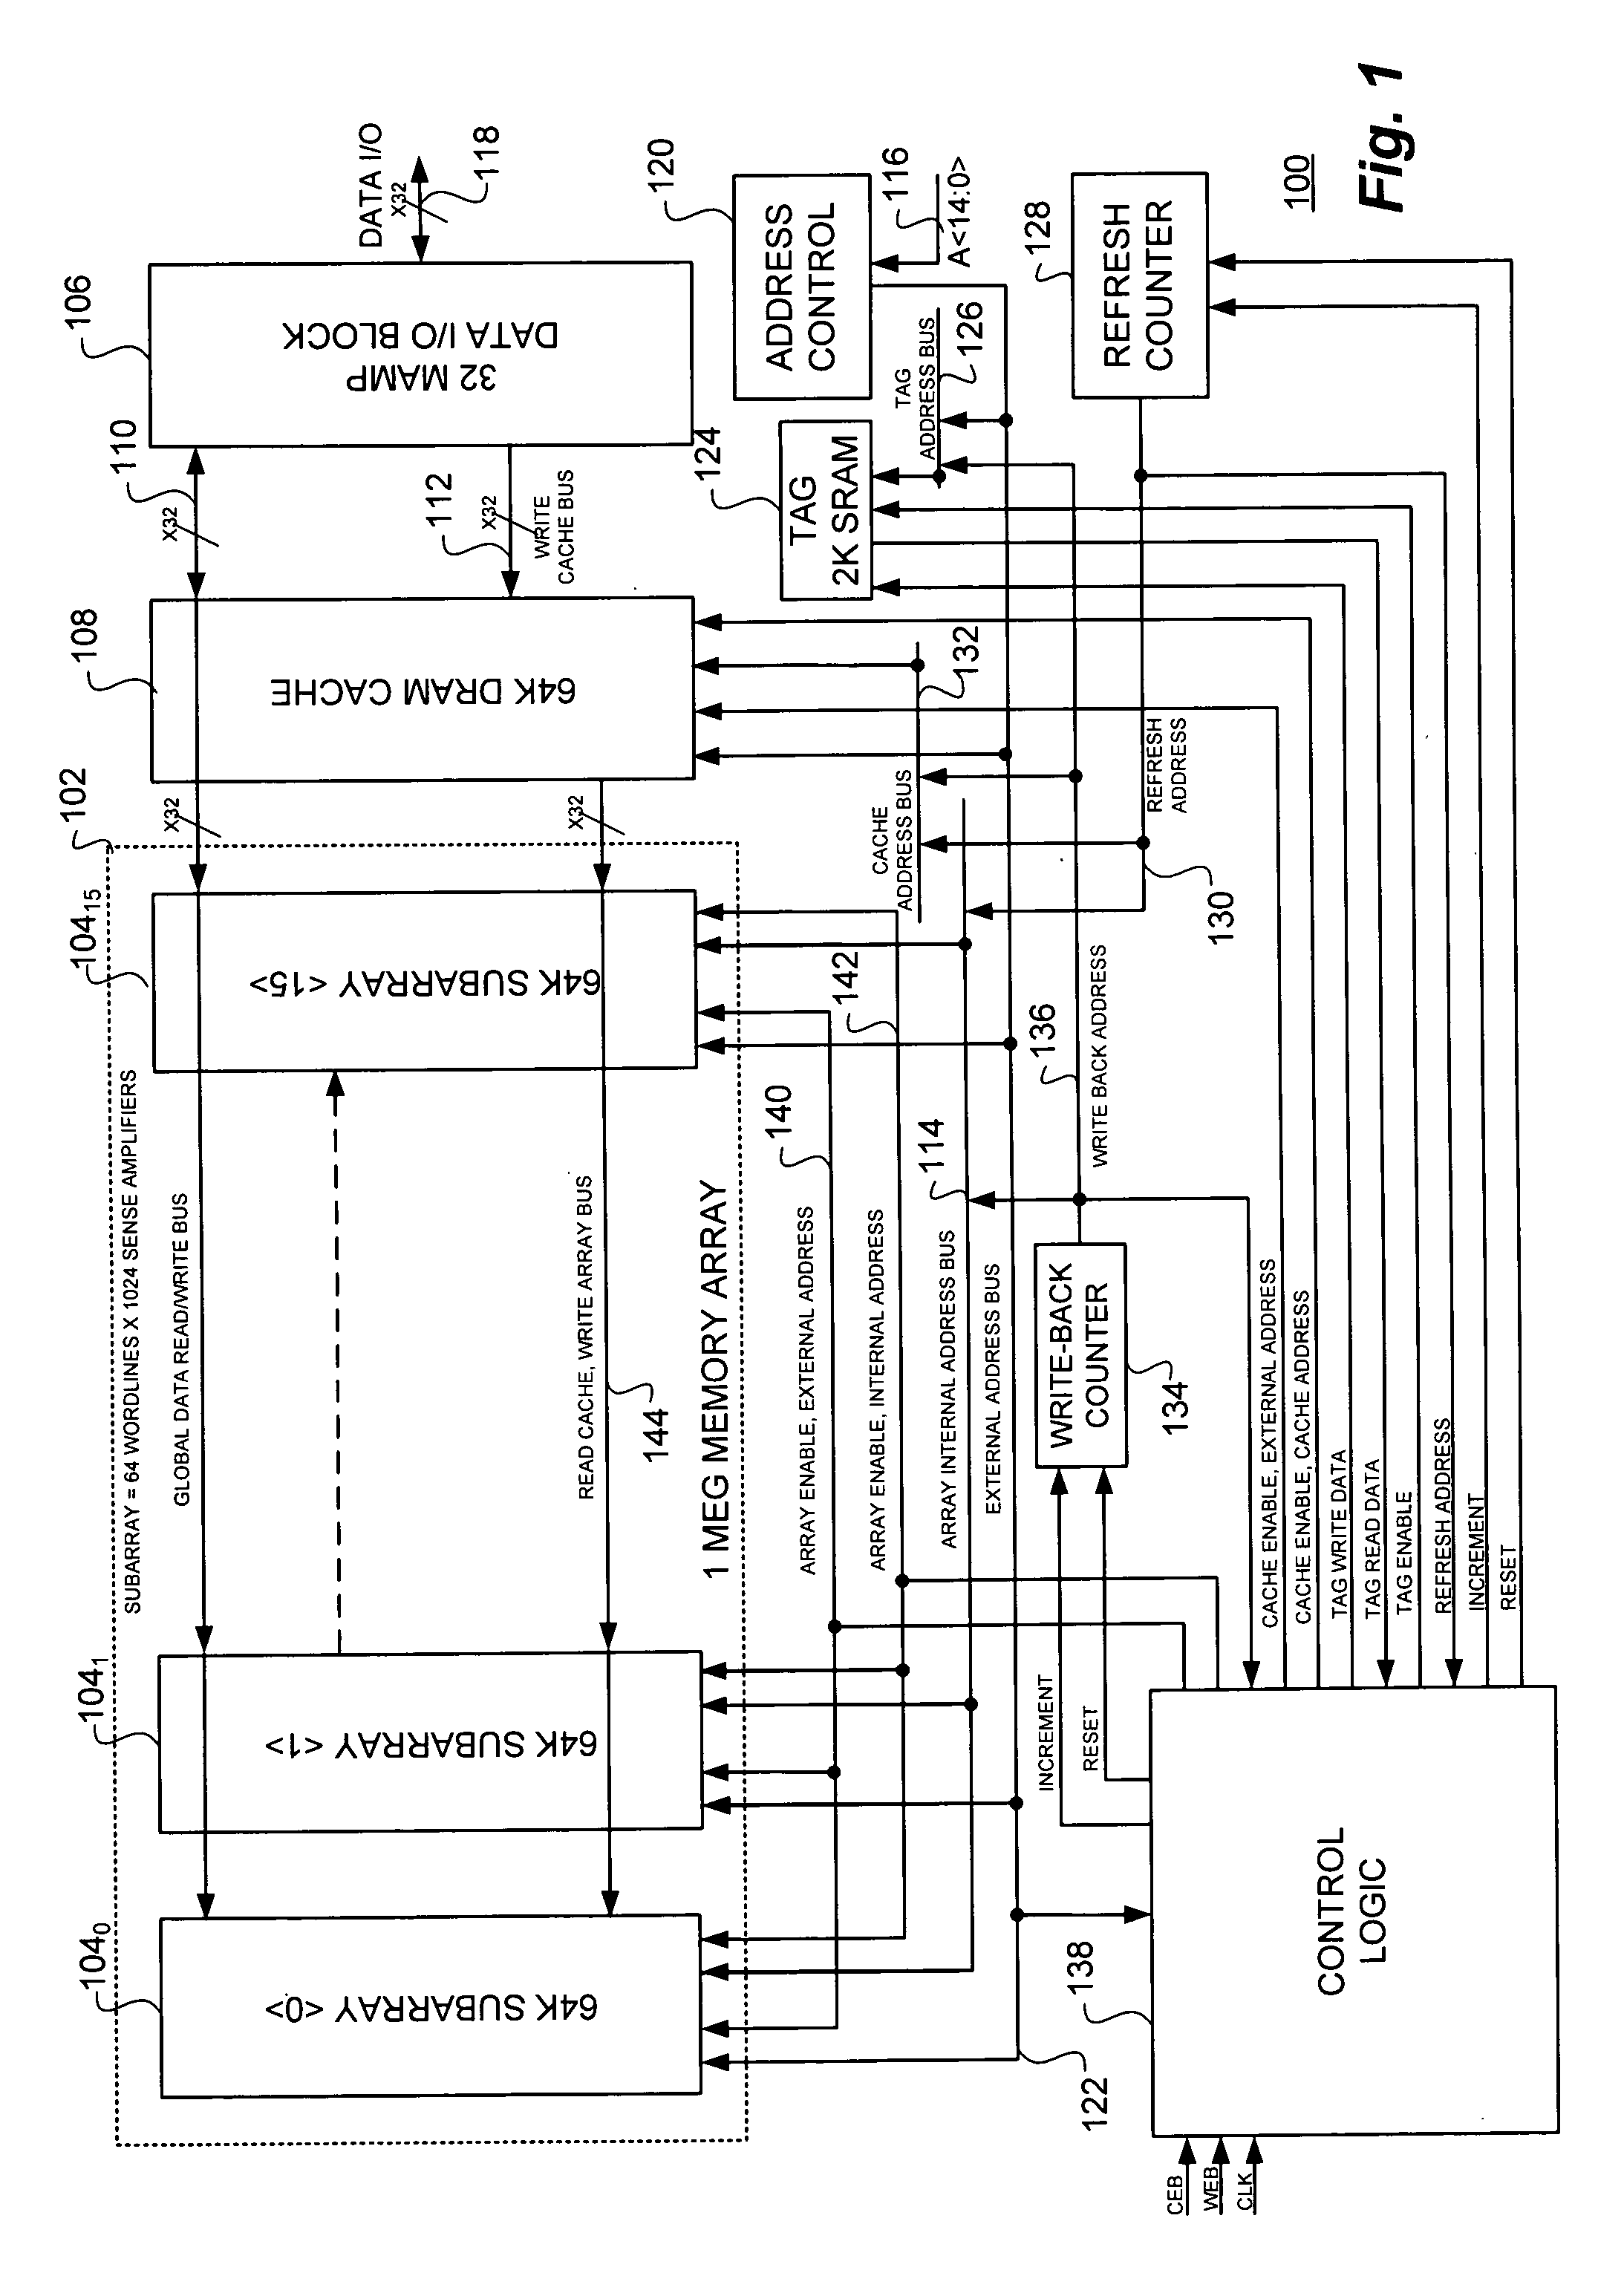 Static random access memory (SRAM) compatible, high availability memory array and method employing synchronous dynamic random access memory (DRAM) in conjunction with a data cache and separate read and write registers and tag blocks